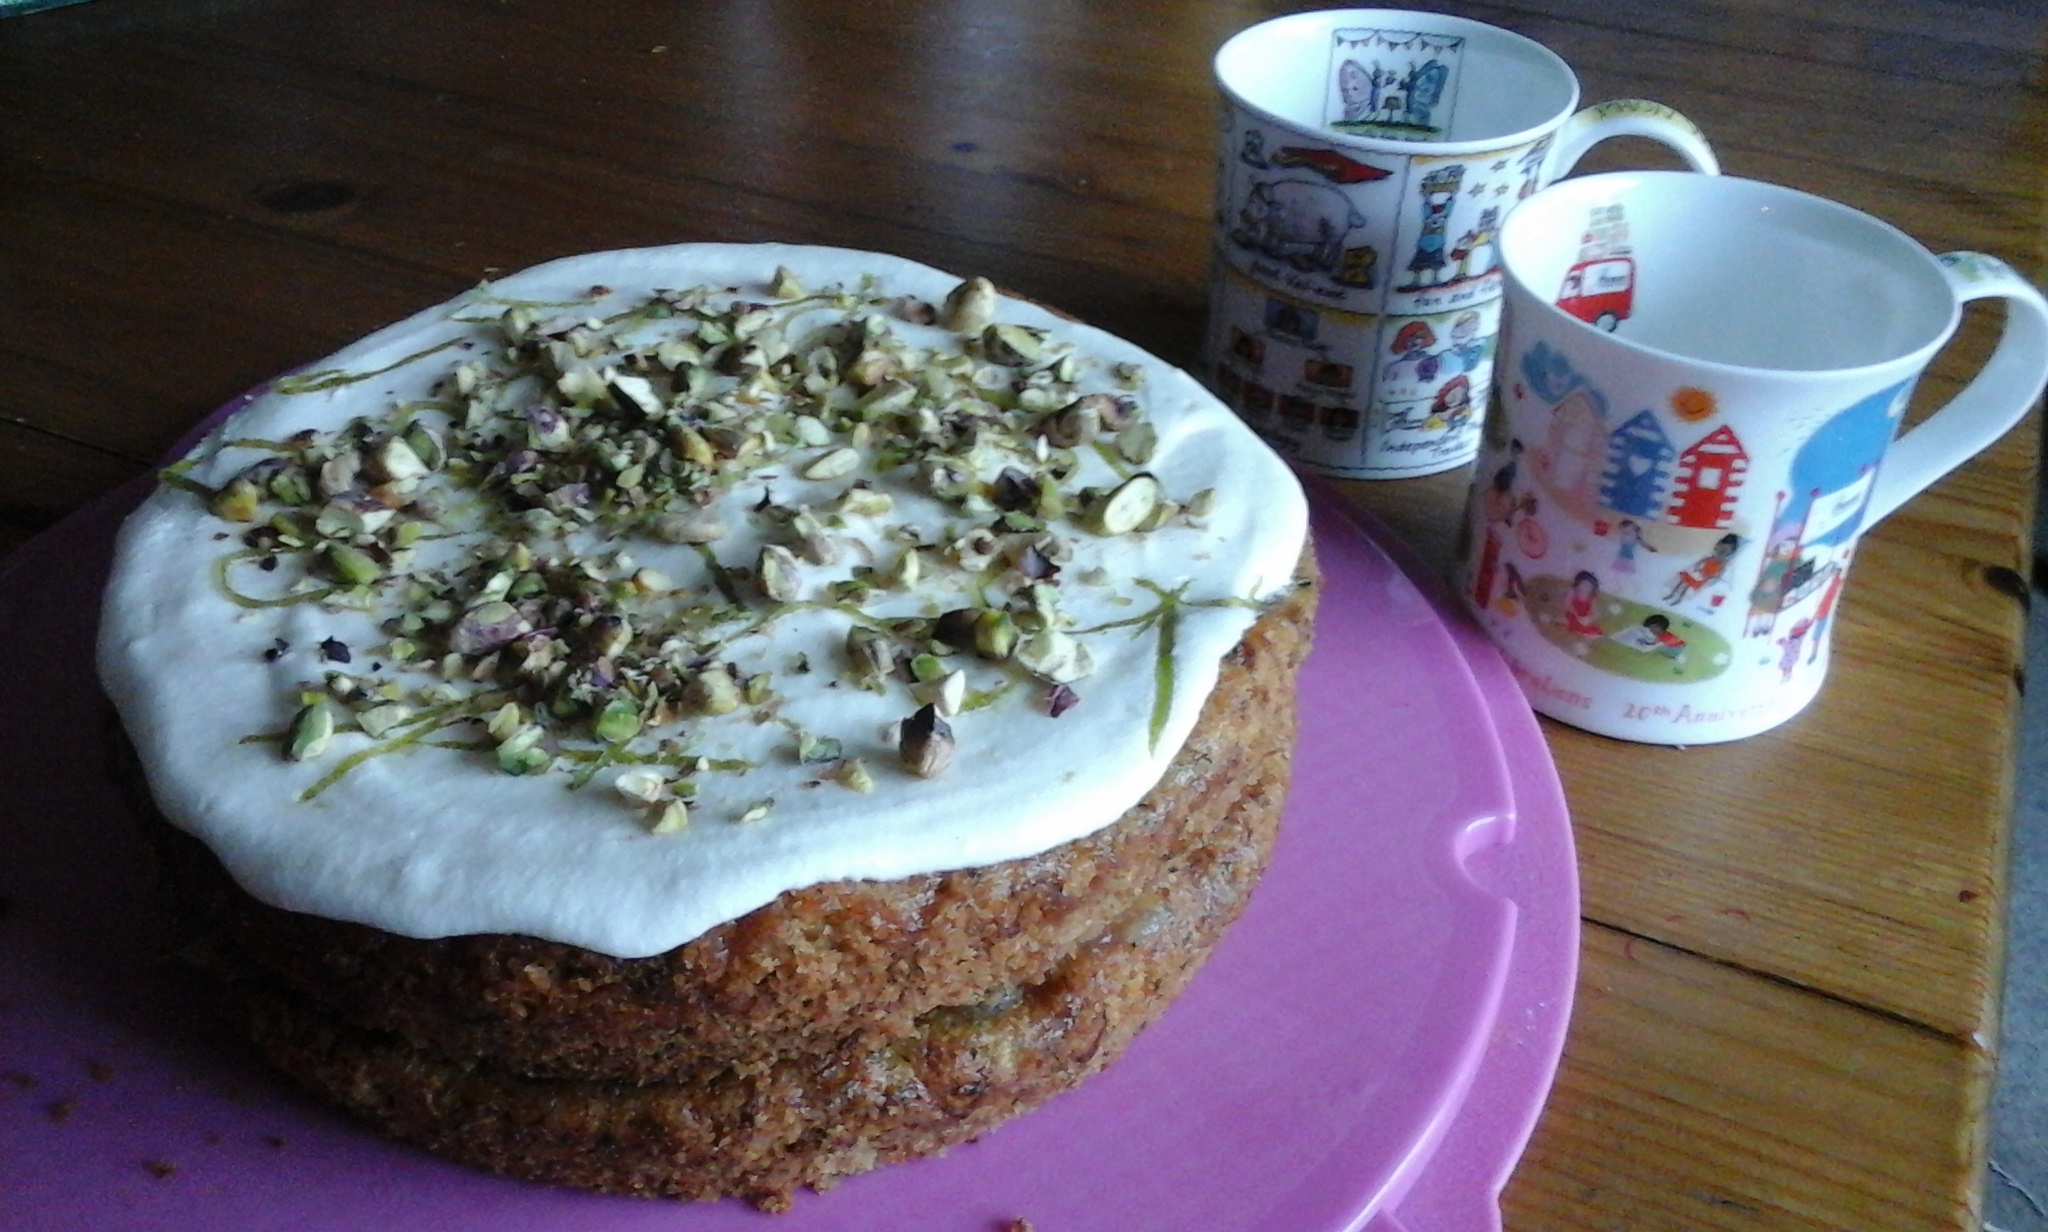 Courgette cake with lemon and lime marmalade